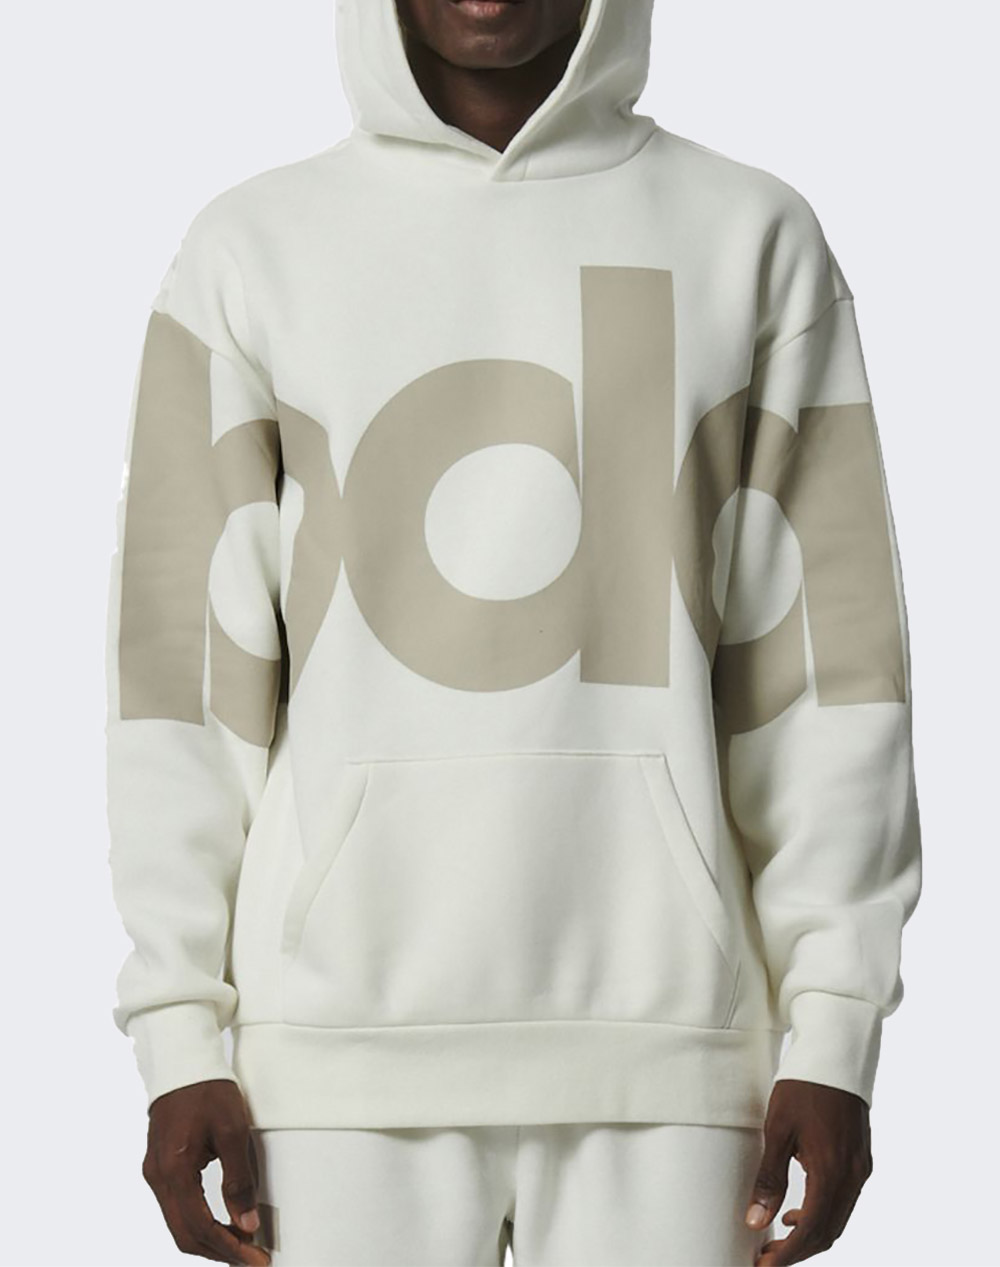 BODY ACTION GENDER NEUTRAL OVERSIZED HOODIE